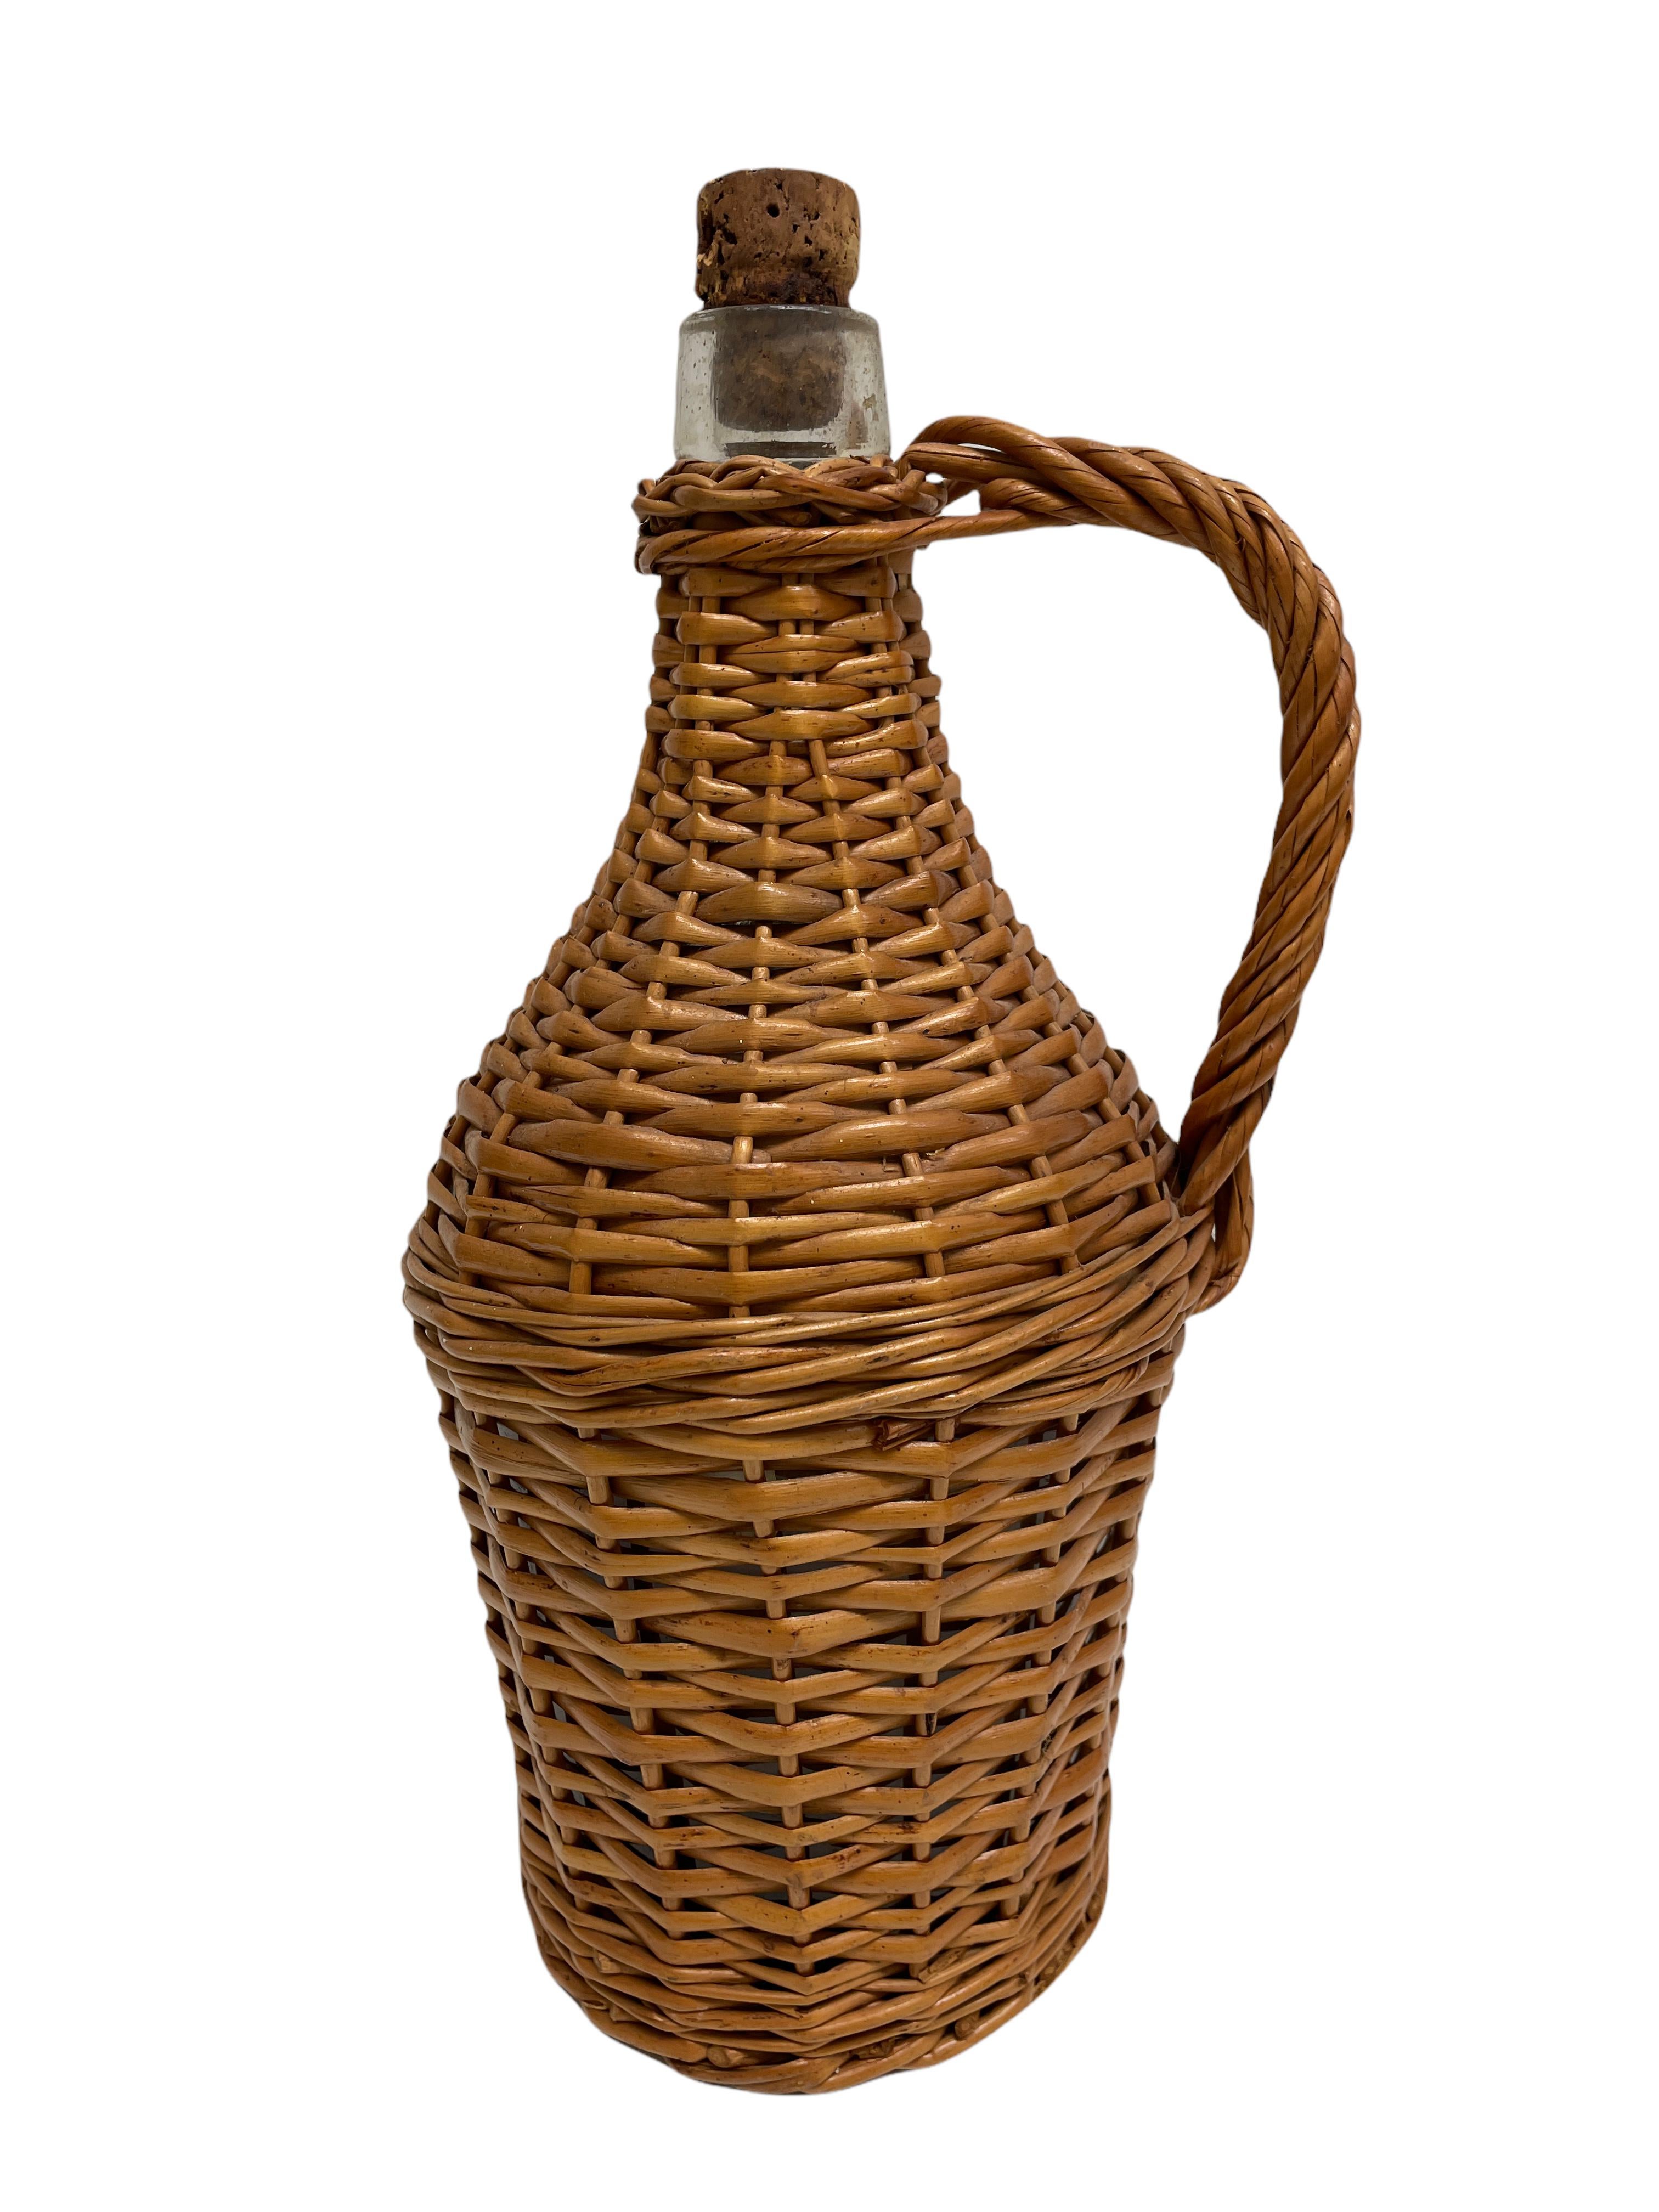 Hand-Crafted Glass Bottle in Woven Basket Wicker Ratan vintage Germany, 1960s